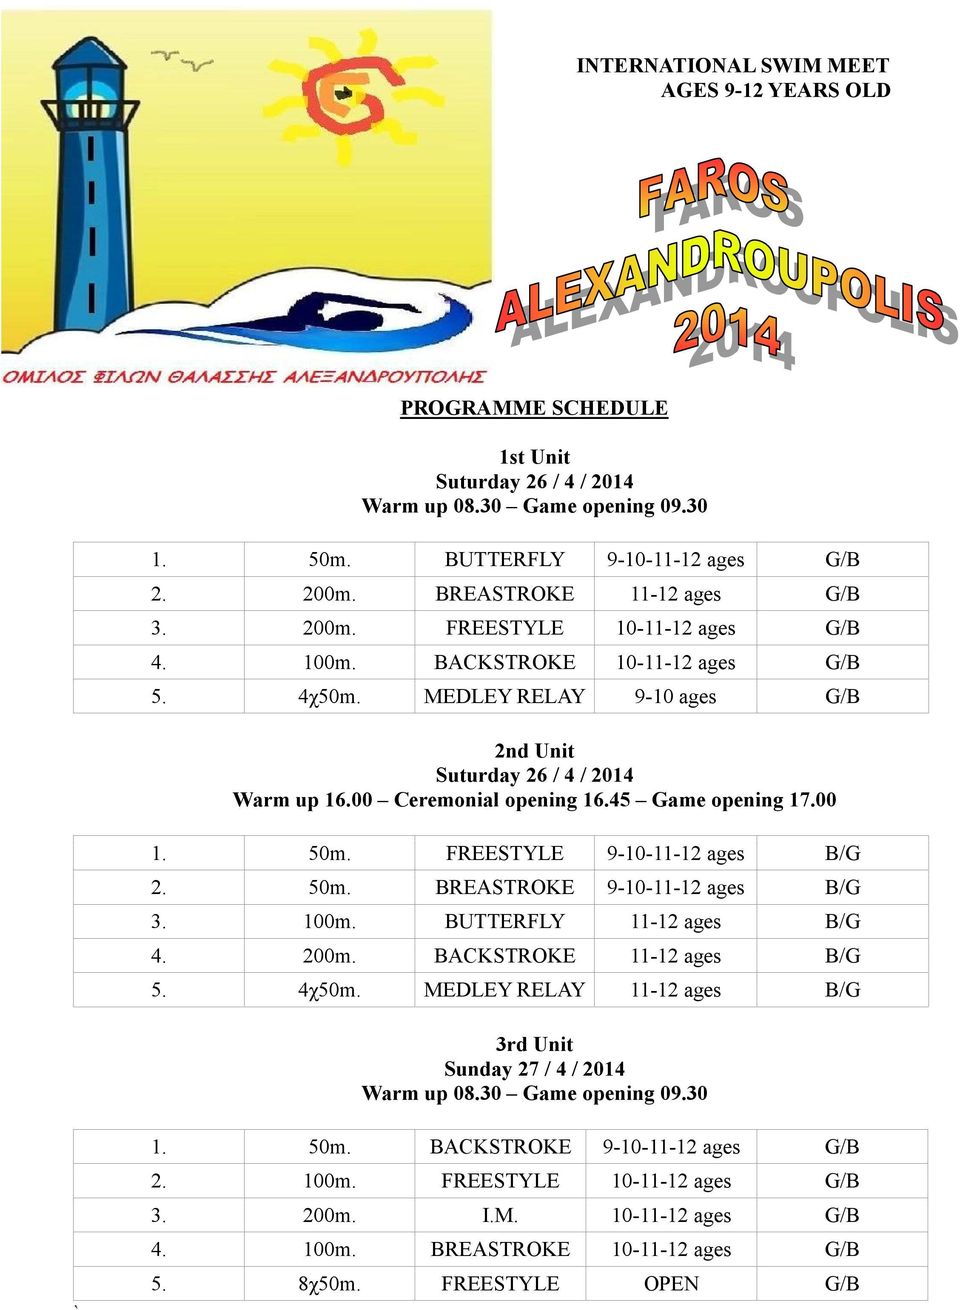 00 Ceremonial opening 16.45 Game opening 17.00 1. 50m. FREESTYLE 9-10-11-12 ages B/G 2. 50m. BREASTROKE 9-10-11-12 ages B/G 3. 100m. BUTTERFLY 11-12 ages B/G 4. 200m. BACKSTROKE 11-12 ages B/G 5.